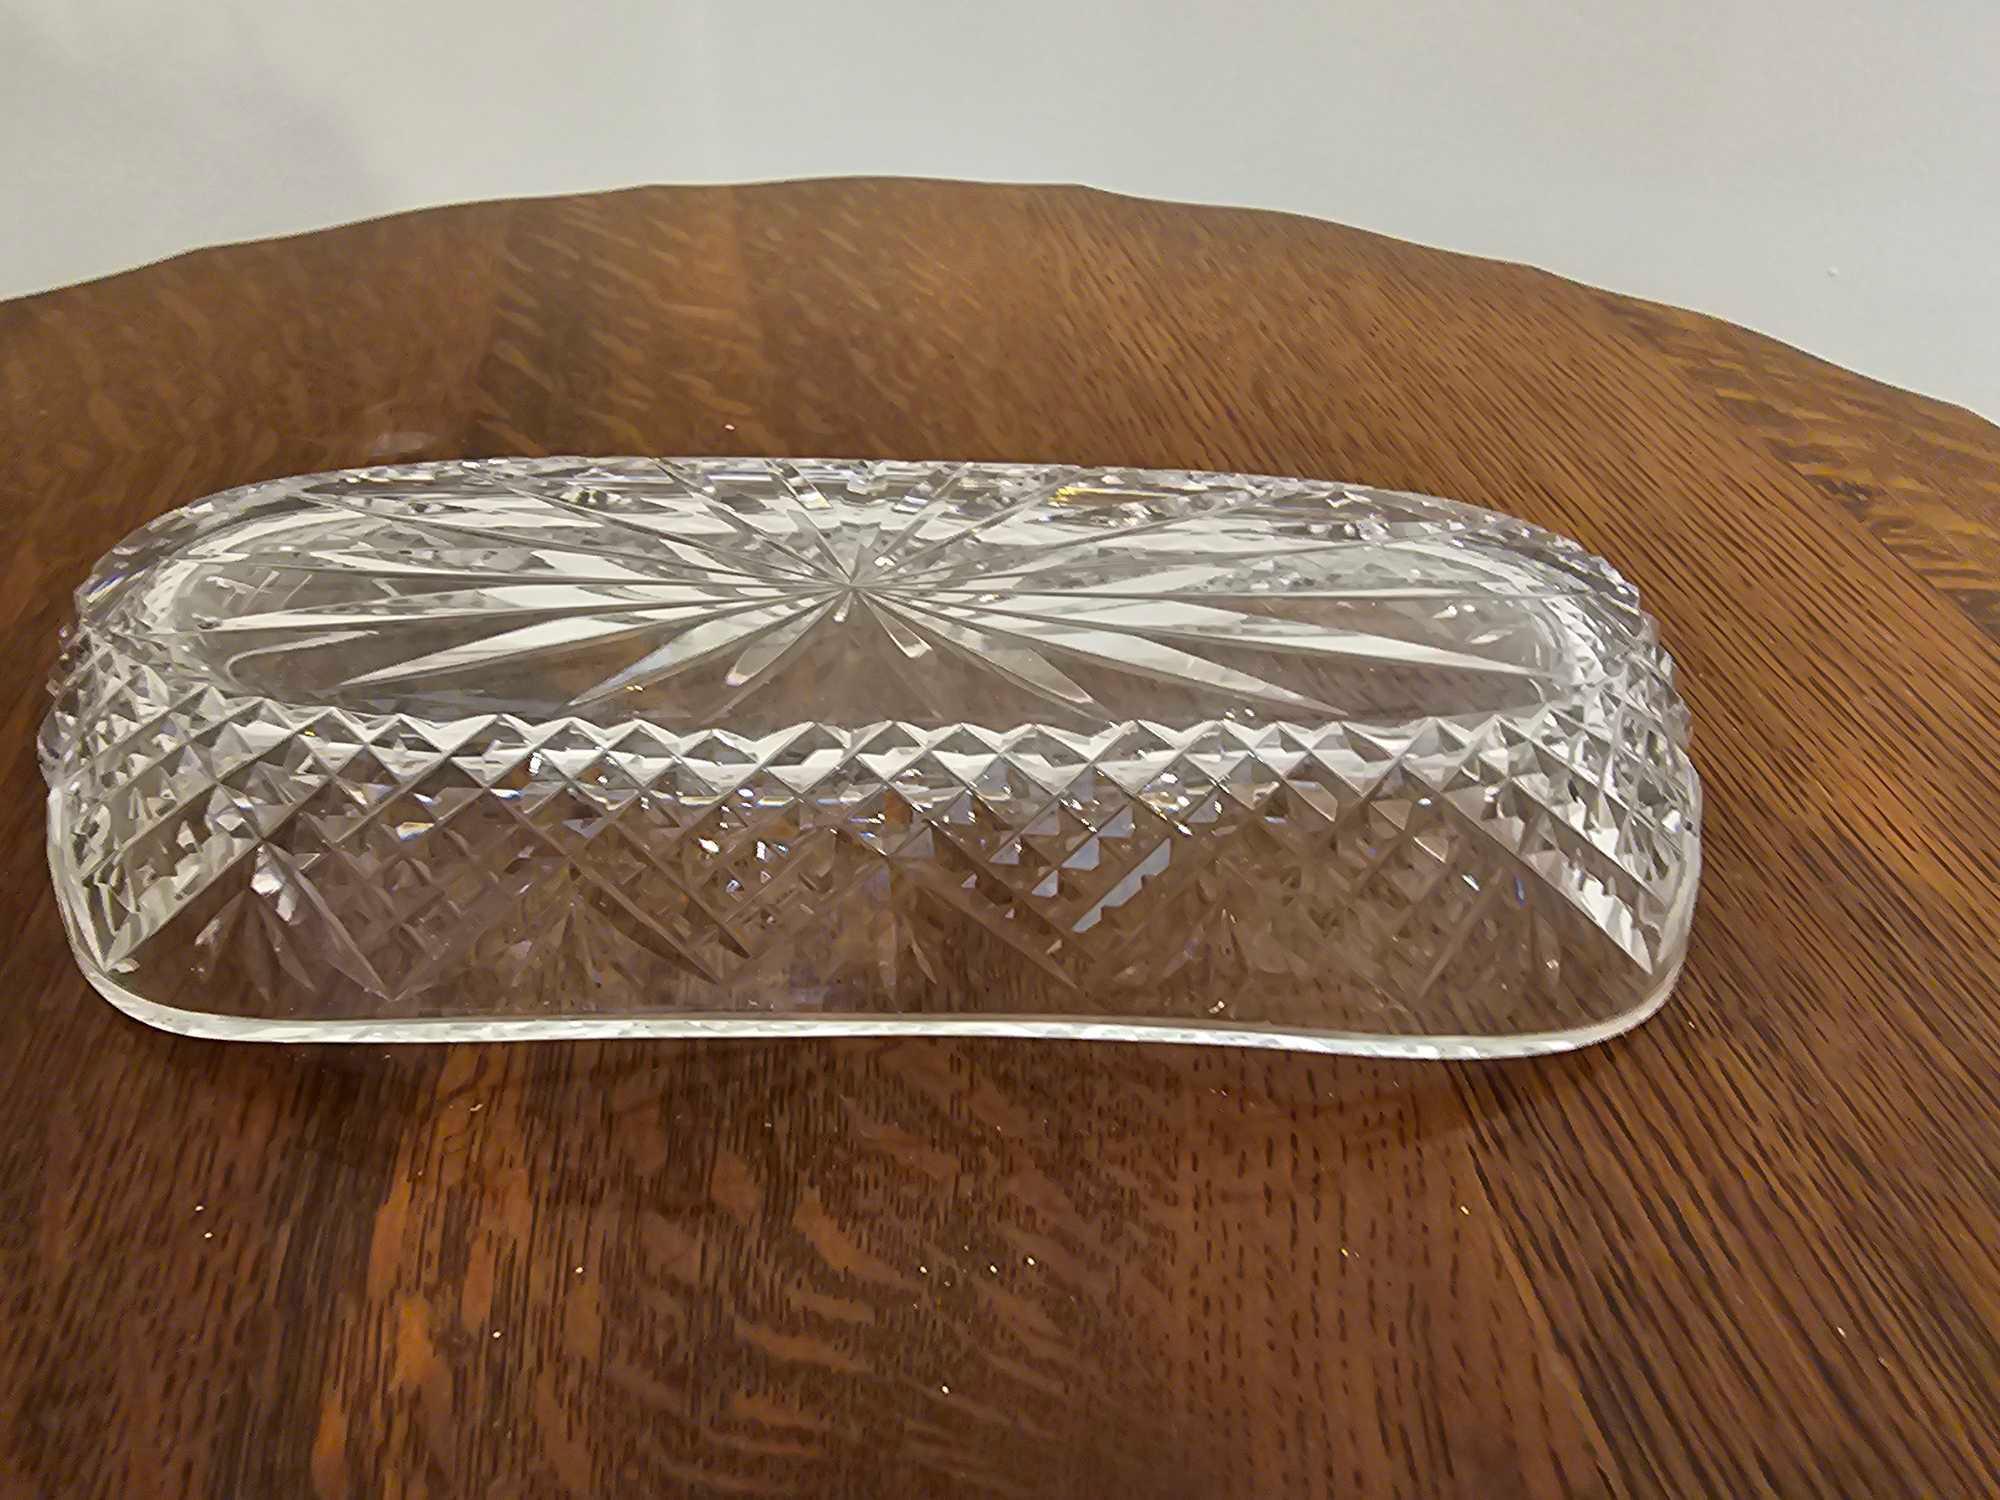 Waterford Crystal Celery Dish 25 X 6cm - Image 4 of 5